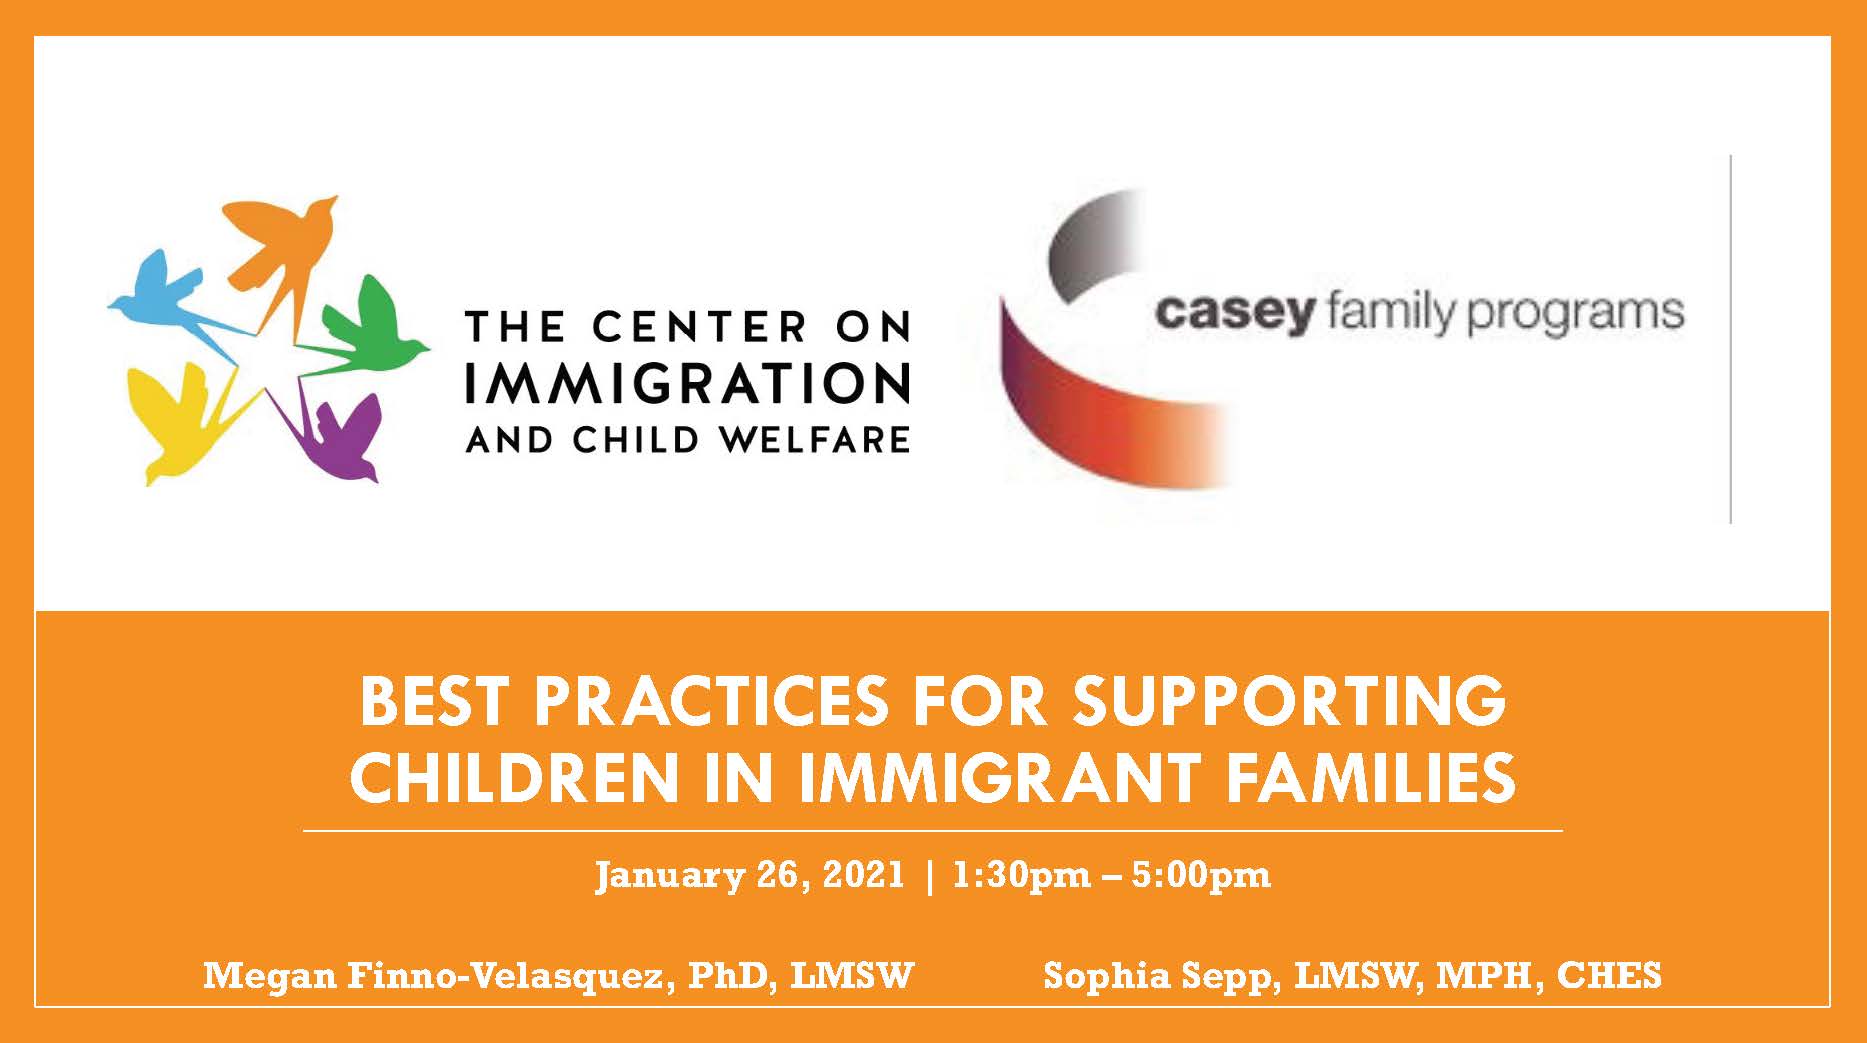 Best practices for supporting children in immigrant families